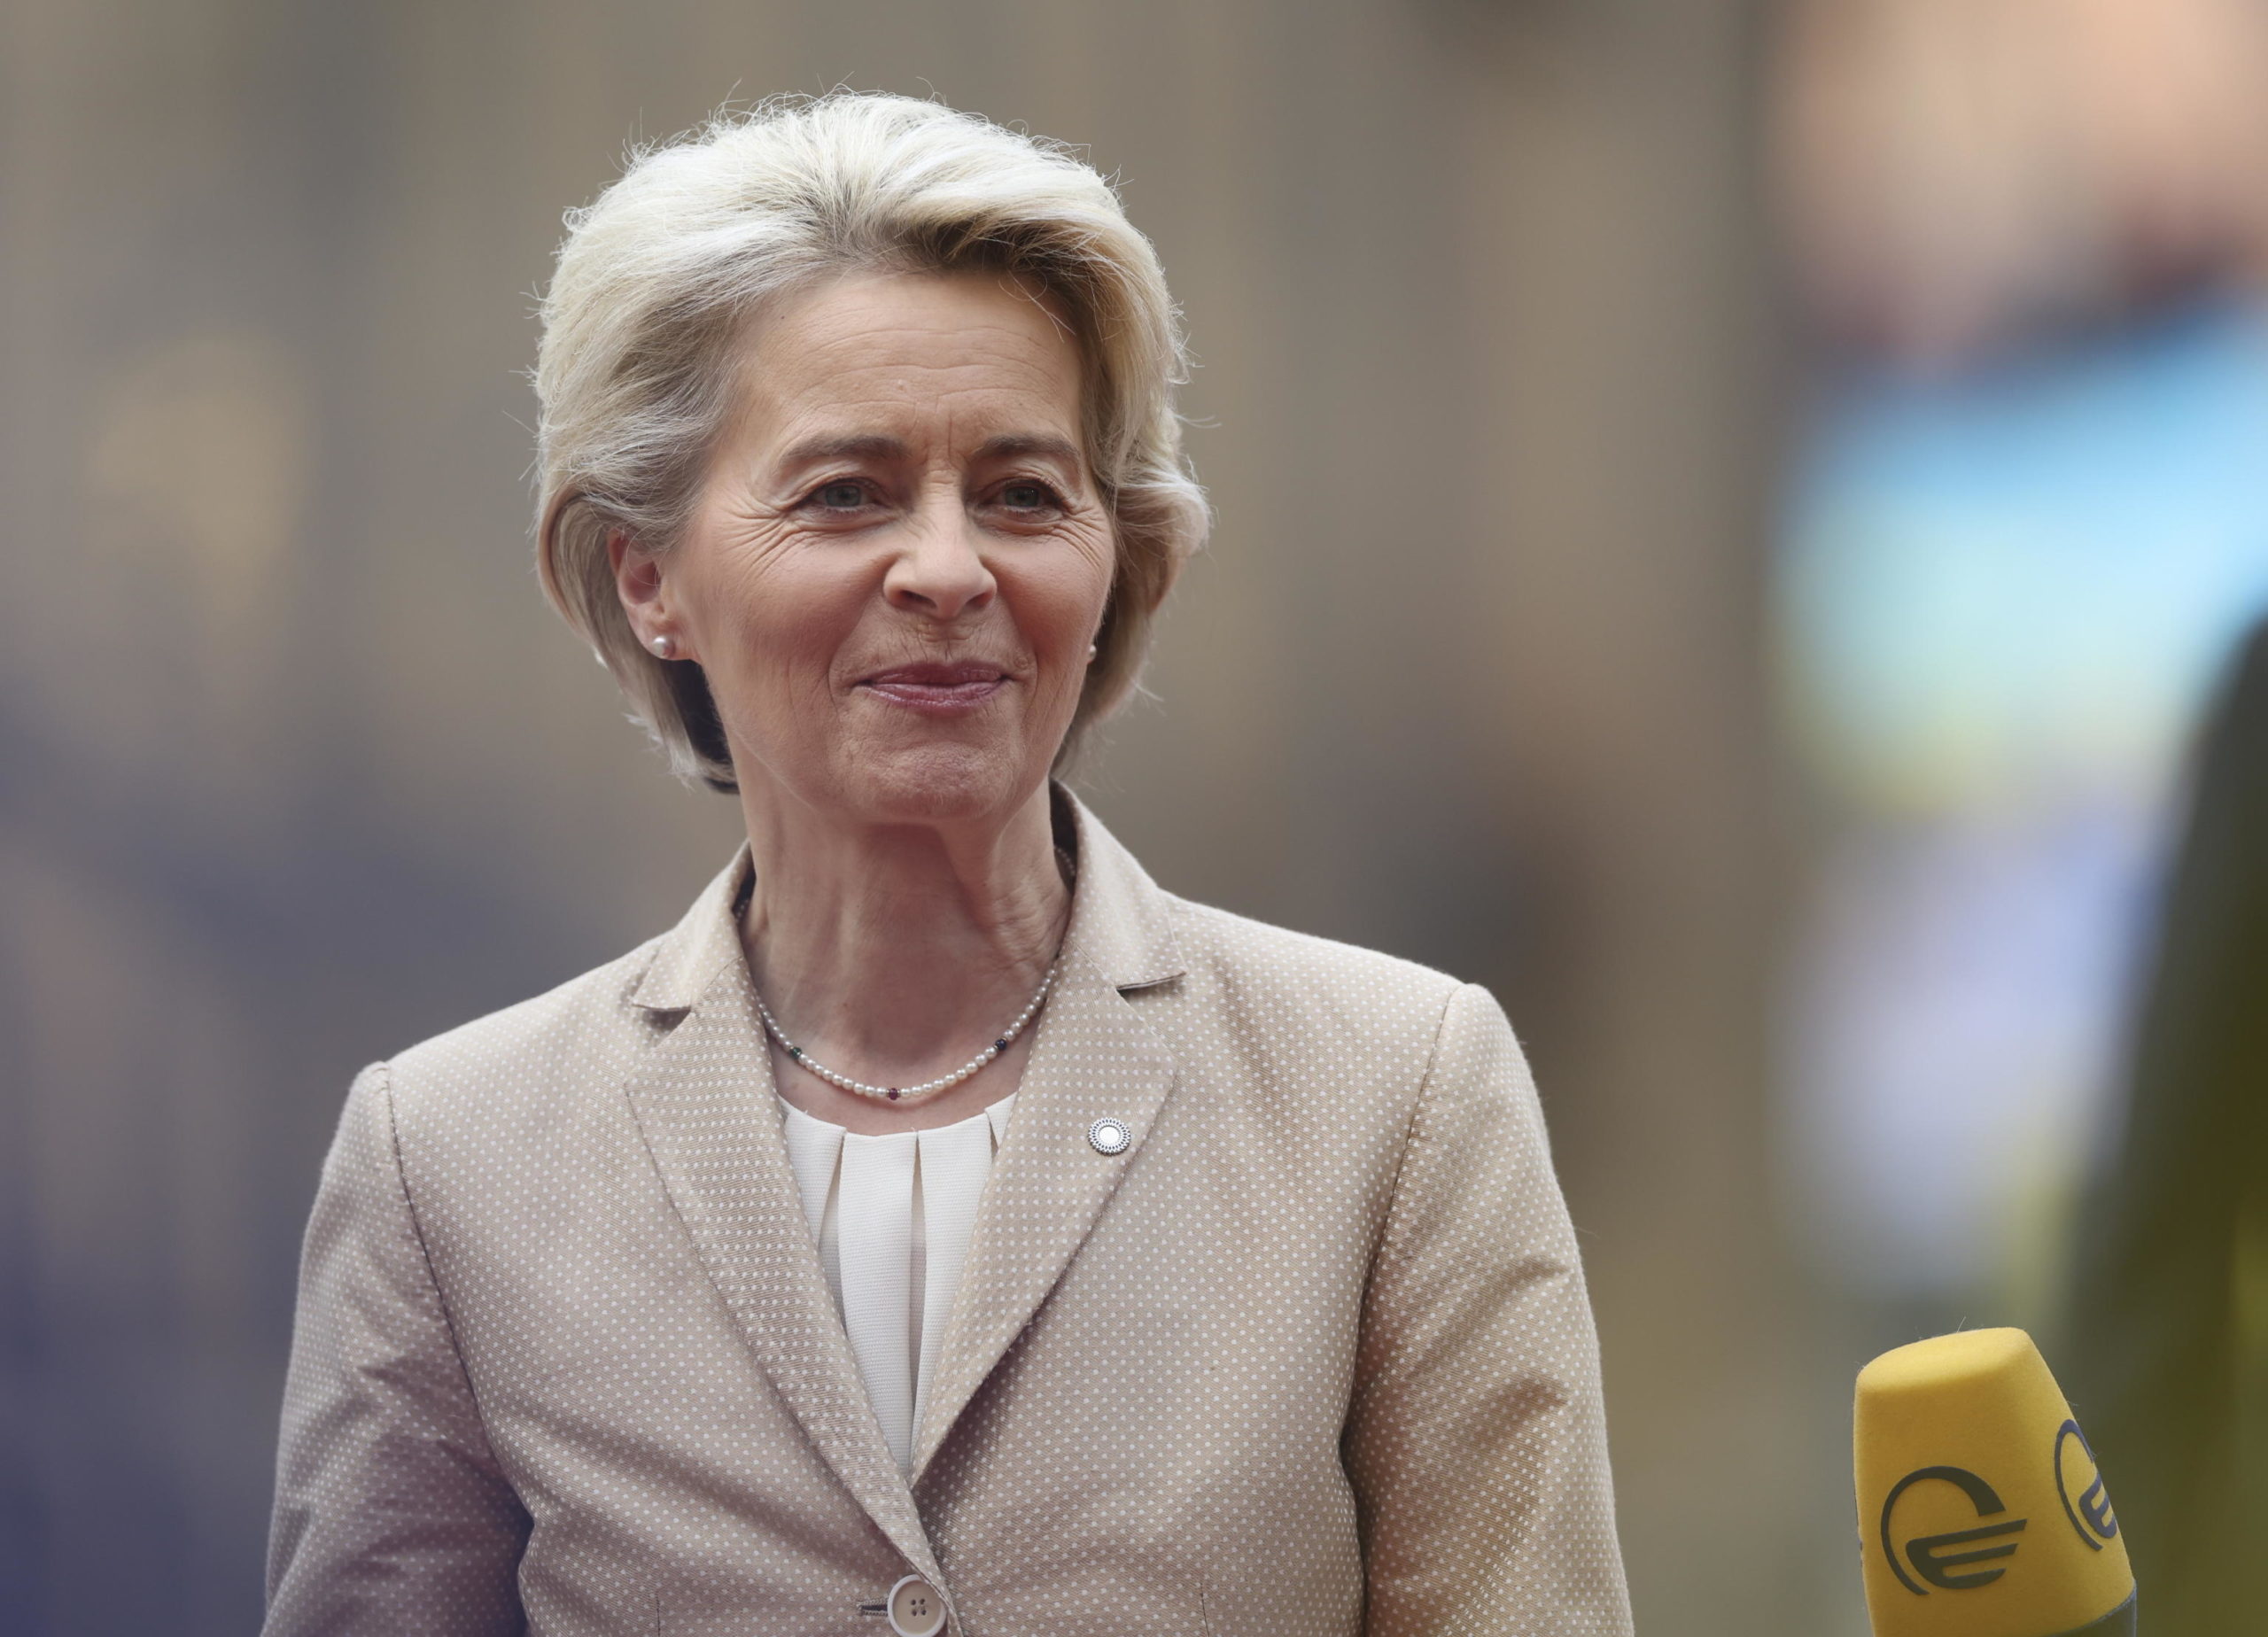 epa10228660 European Commission President Ursula von der Leyen attends an informal EU summit in Prague, Czech Republic, 07 October 2022. EU leaders will meet in the Czech capital to discuss pressing issues such as Russia's invasion of Ukraine and the block's energy and economic situation.  EPA/MARTIN DIVISEK